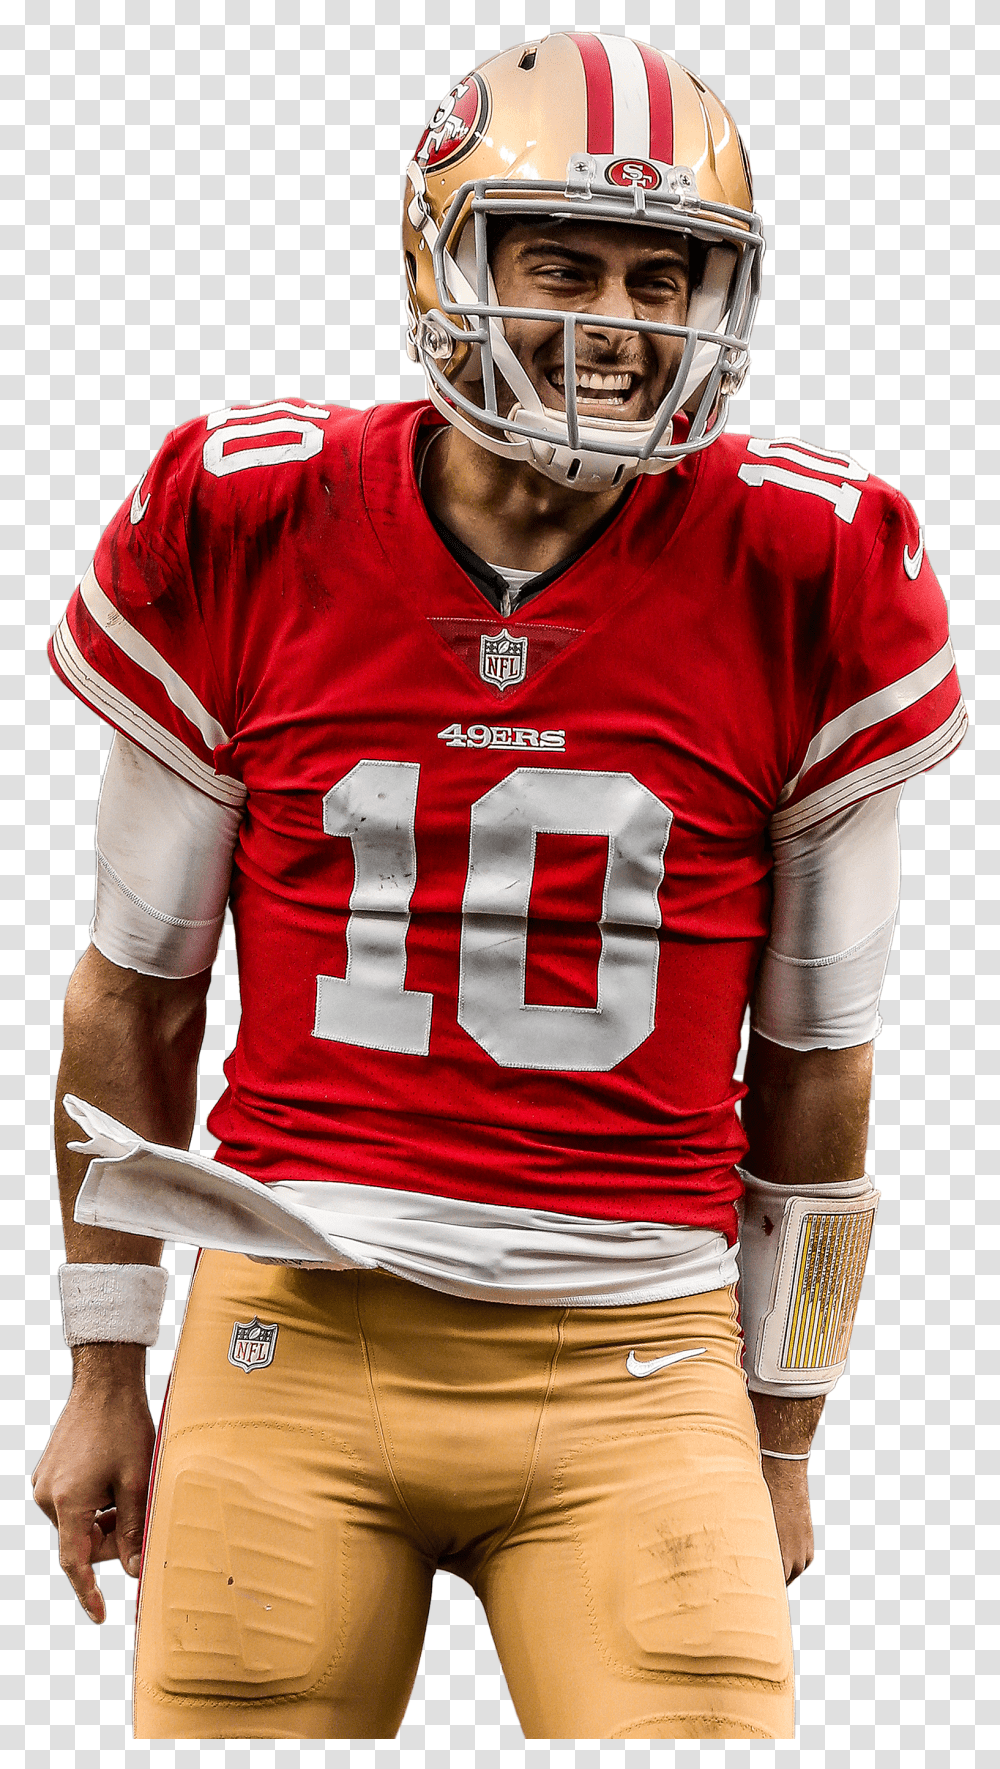 Jimmy Garoppolo Wallpaper Iphone Transparent Png